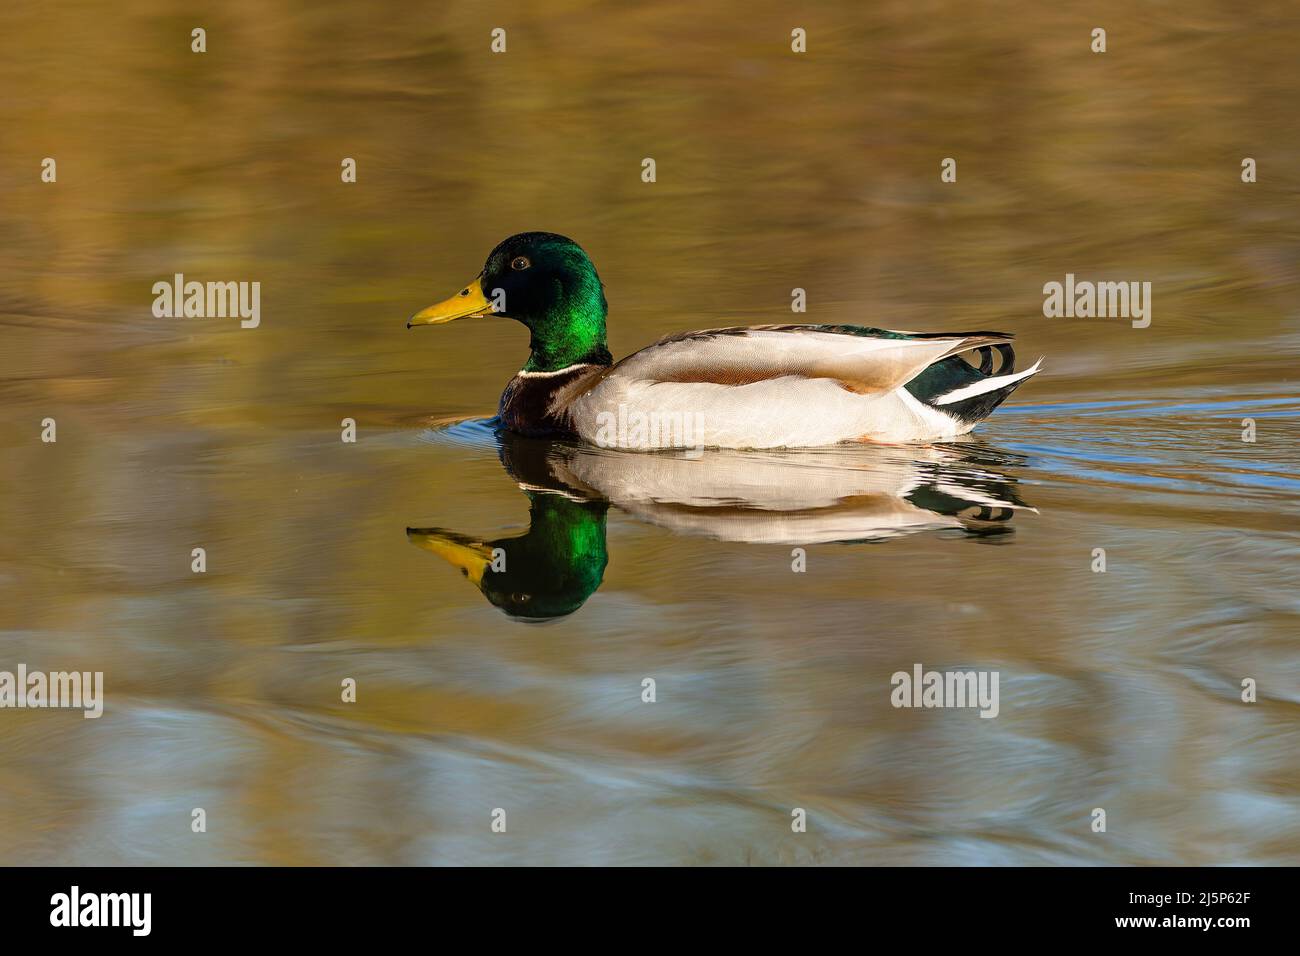 A male mallard duck, a drake, with green head and yellow beak swimming in a lake on a spring sunny day. Reflection of the bird and blue sky in the wat Stock Photo